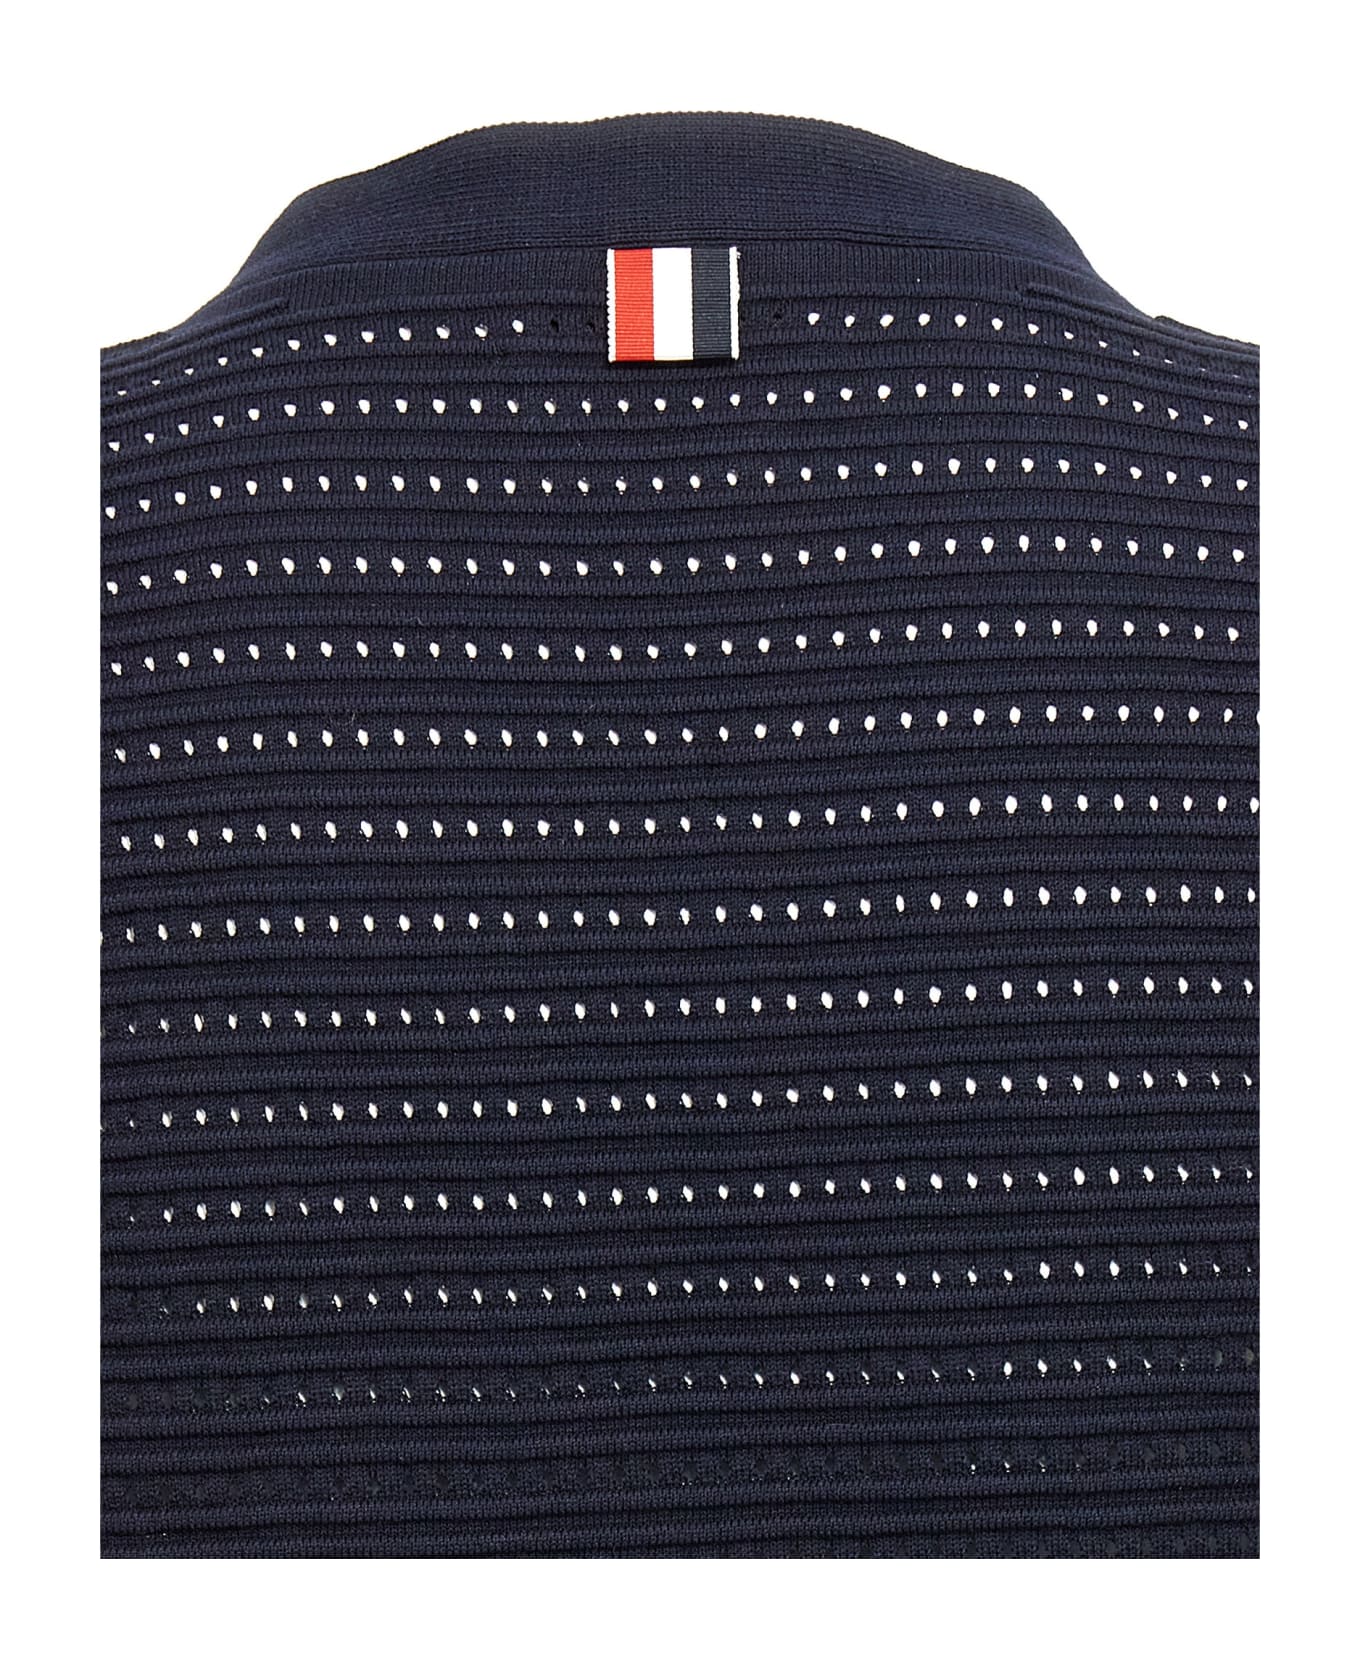 Thom Browne Openwork Dress With Pleated Skirt - Blue